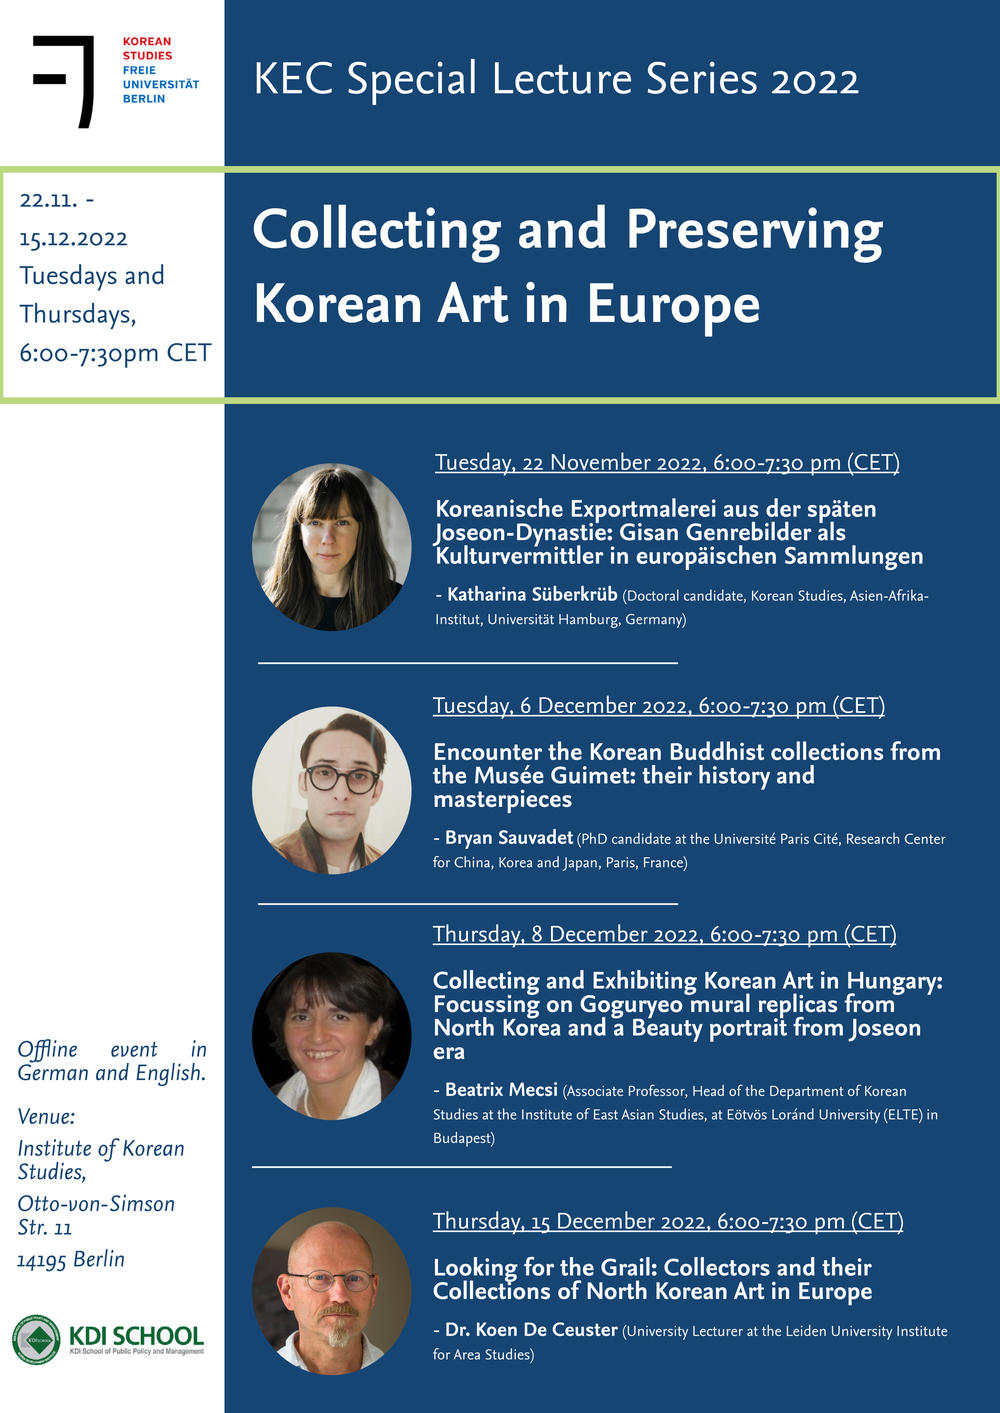 KEC Special Lecture Series 2022 - Collecting and Preserving Korean Art in Europe